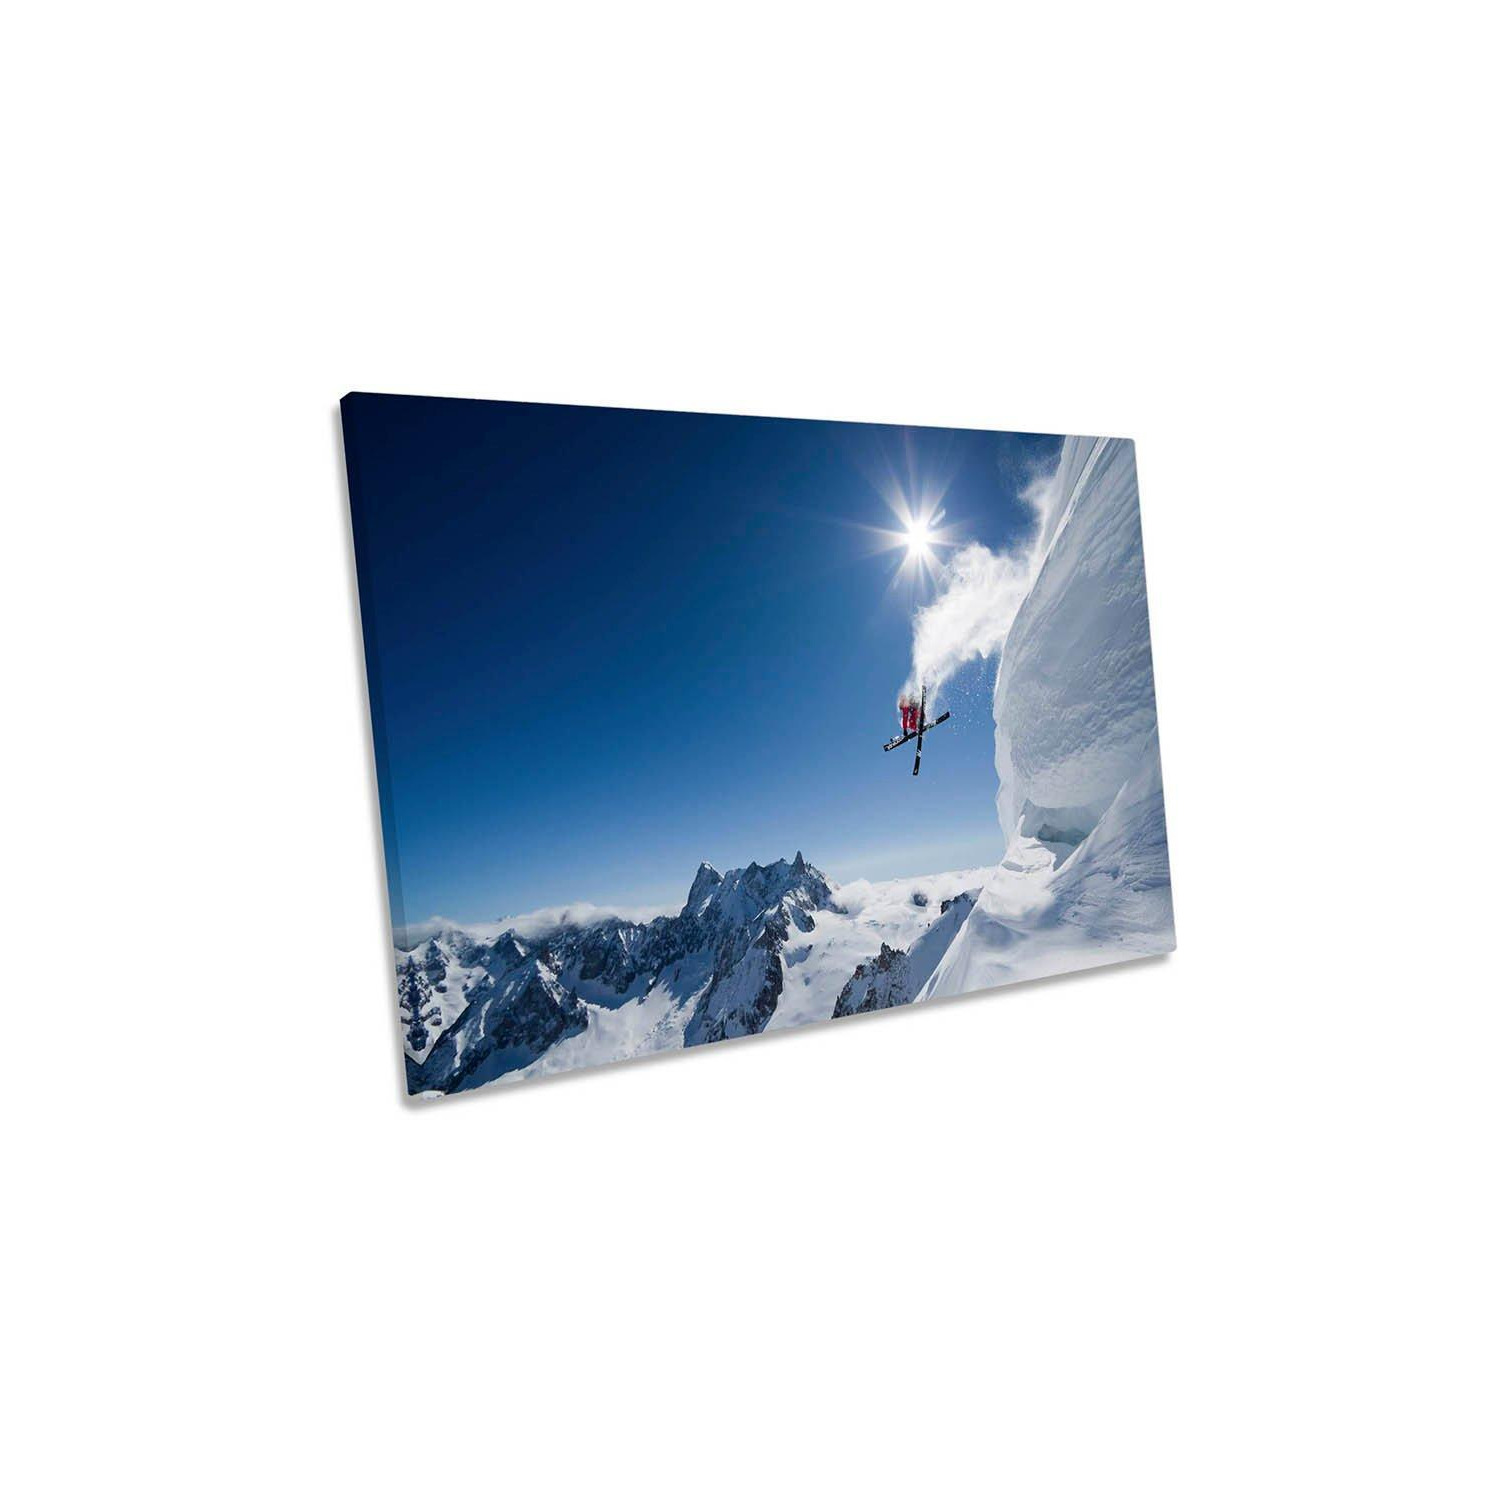 Higher Skiing Extreme Sports Canvas Wall Art Picture Print - image 1